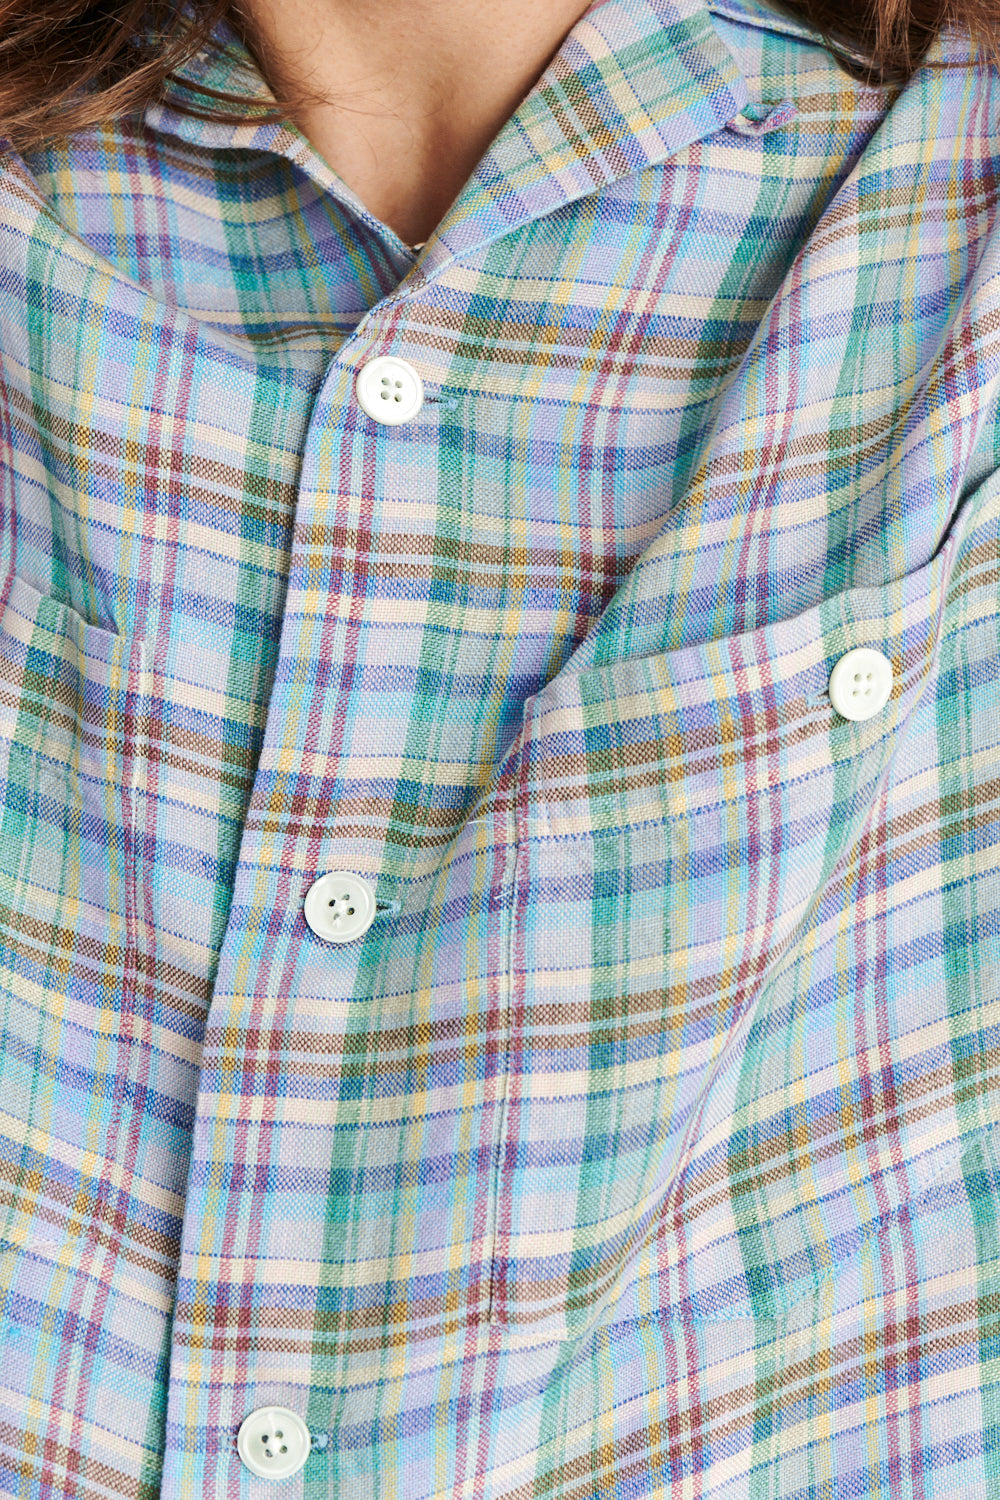 Short Sleeve Camp Collar Shirt in a Vivid Green, Yellow, Light Blue and Rust Red Chequered Italian Linen